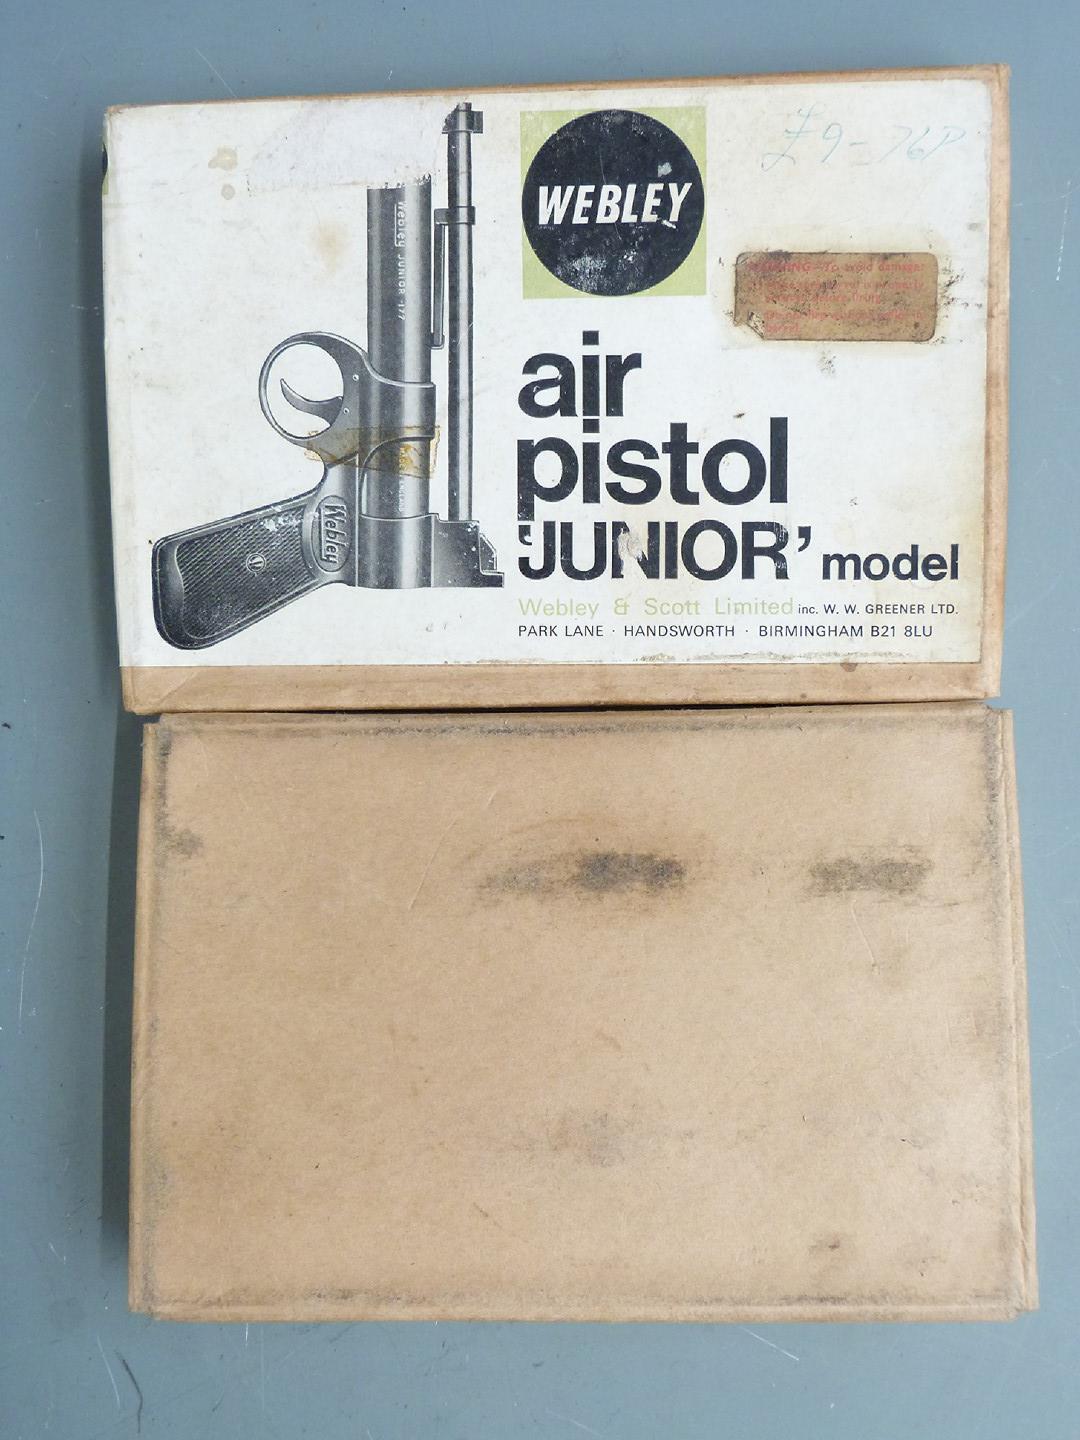 Webley Junior .177 air pistol with named and chequered grips, serial number 248, in original box. - Image 5 of 5